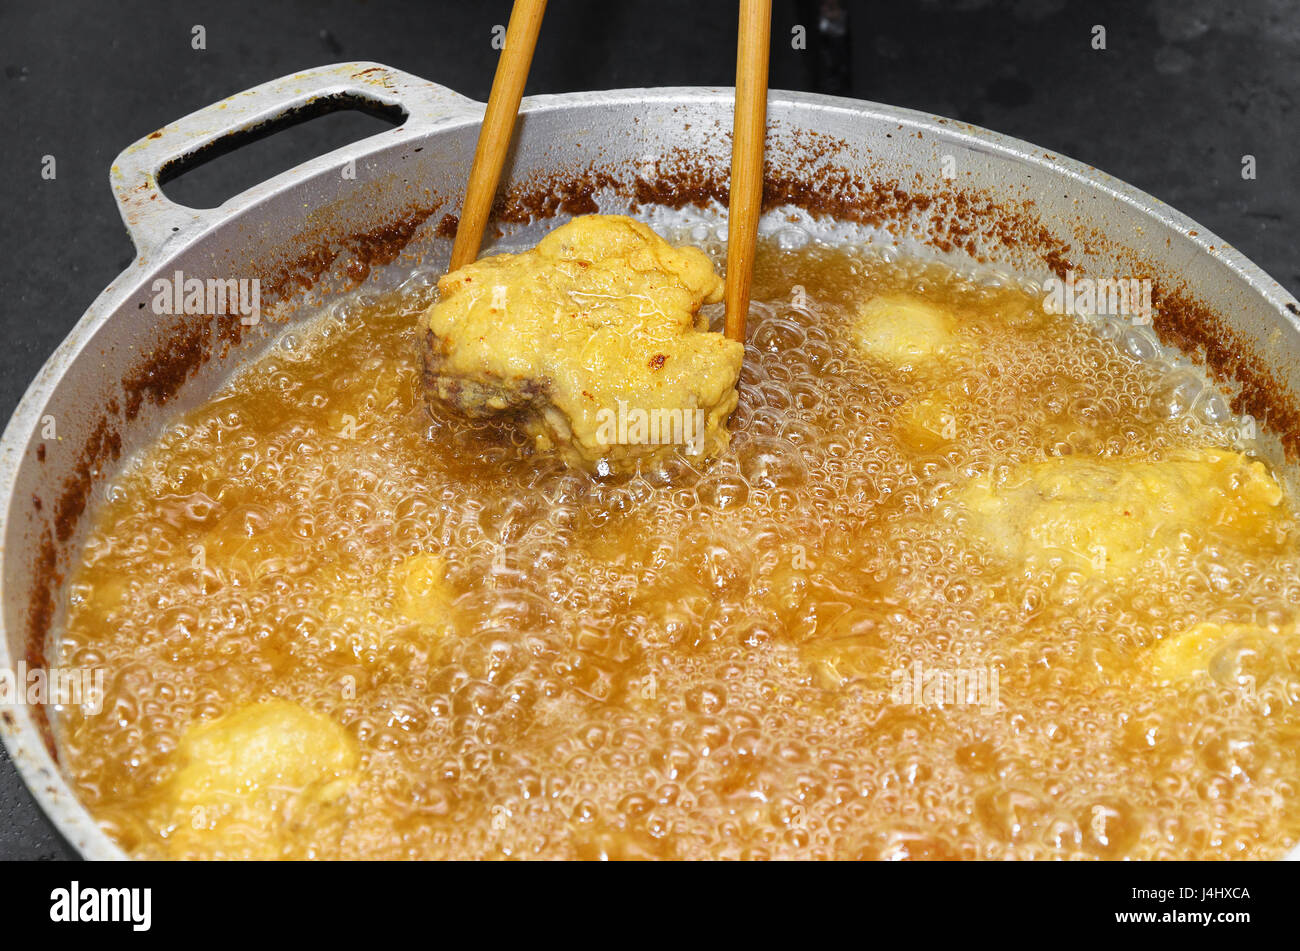 Frying fish in a pan with boiling oil. Taking out of a pan a slice of fried and breaded Pintado fish with a chopstick. Stock Photo